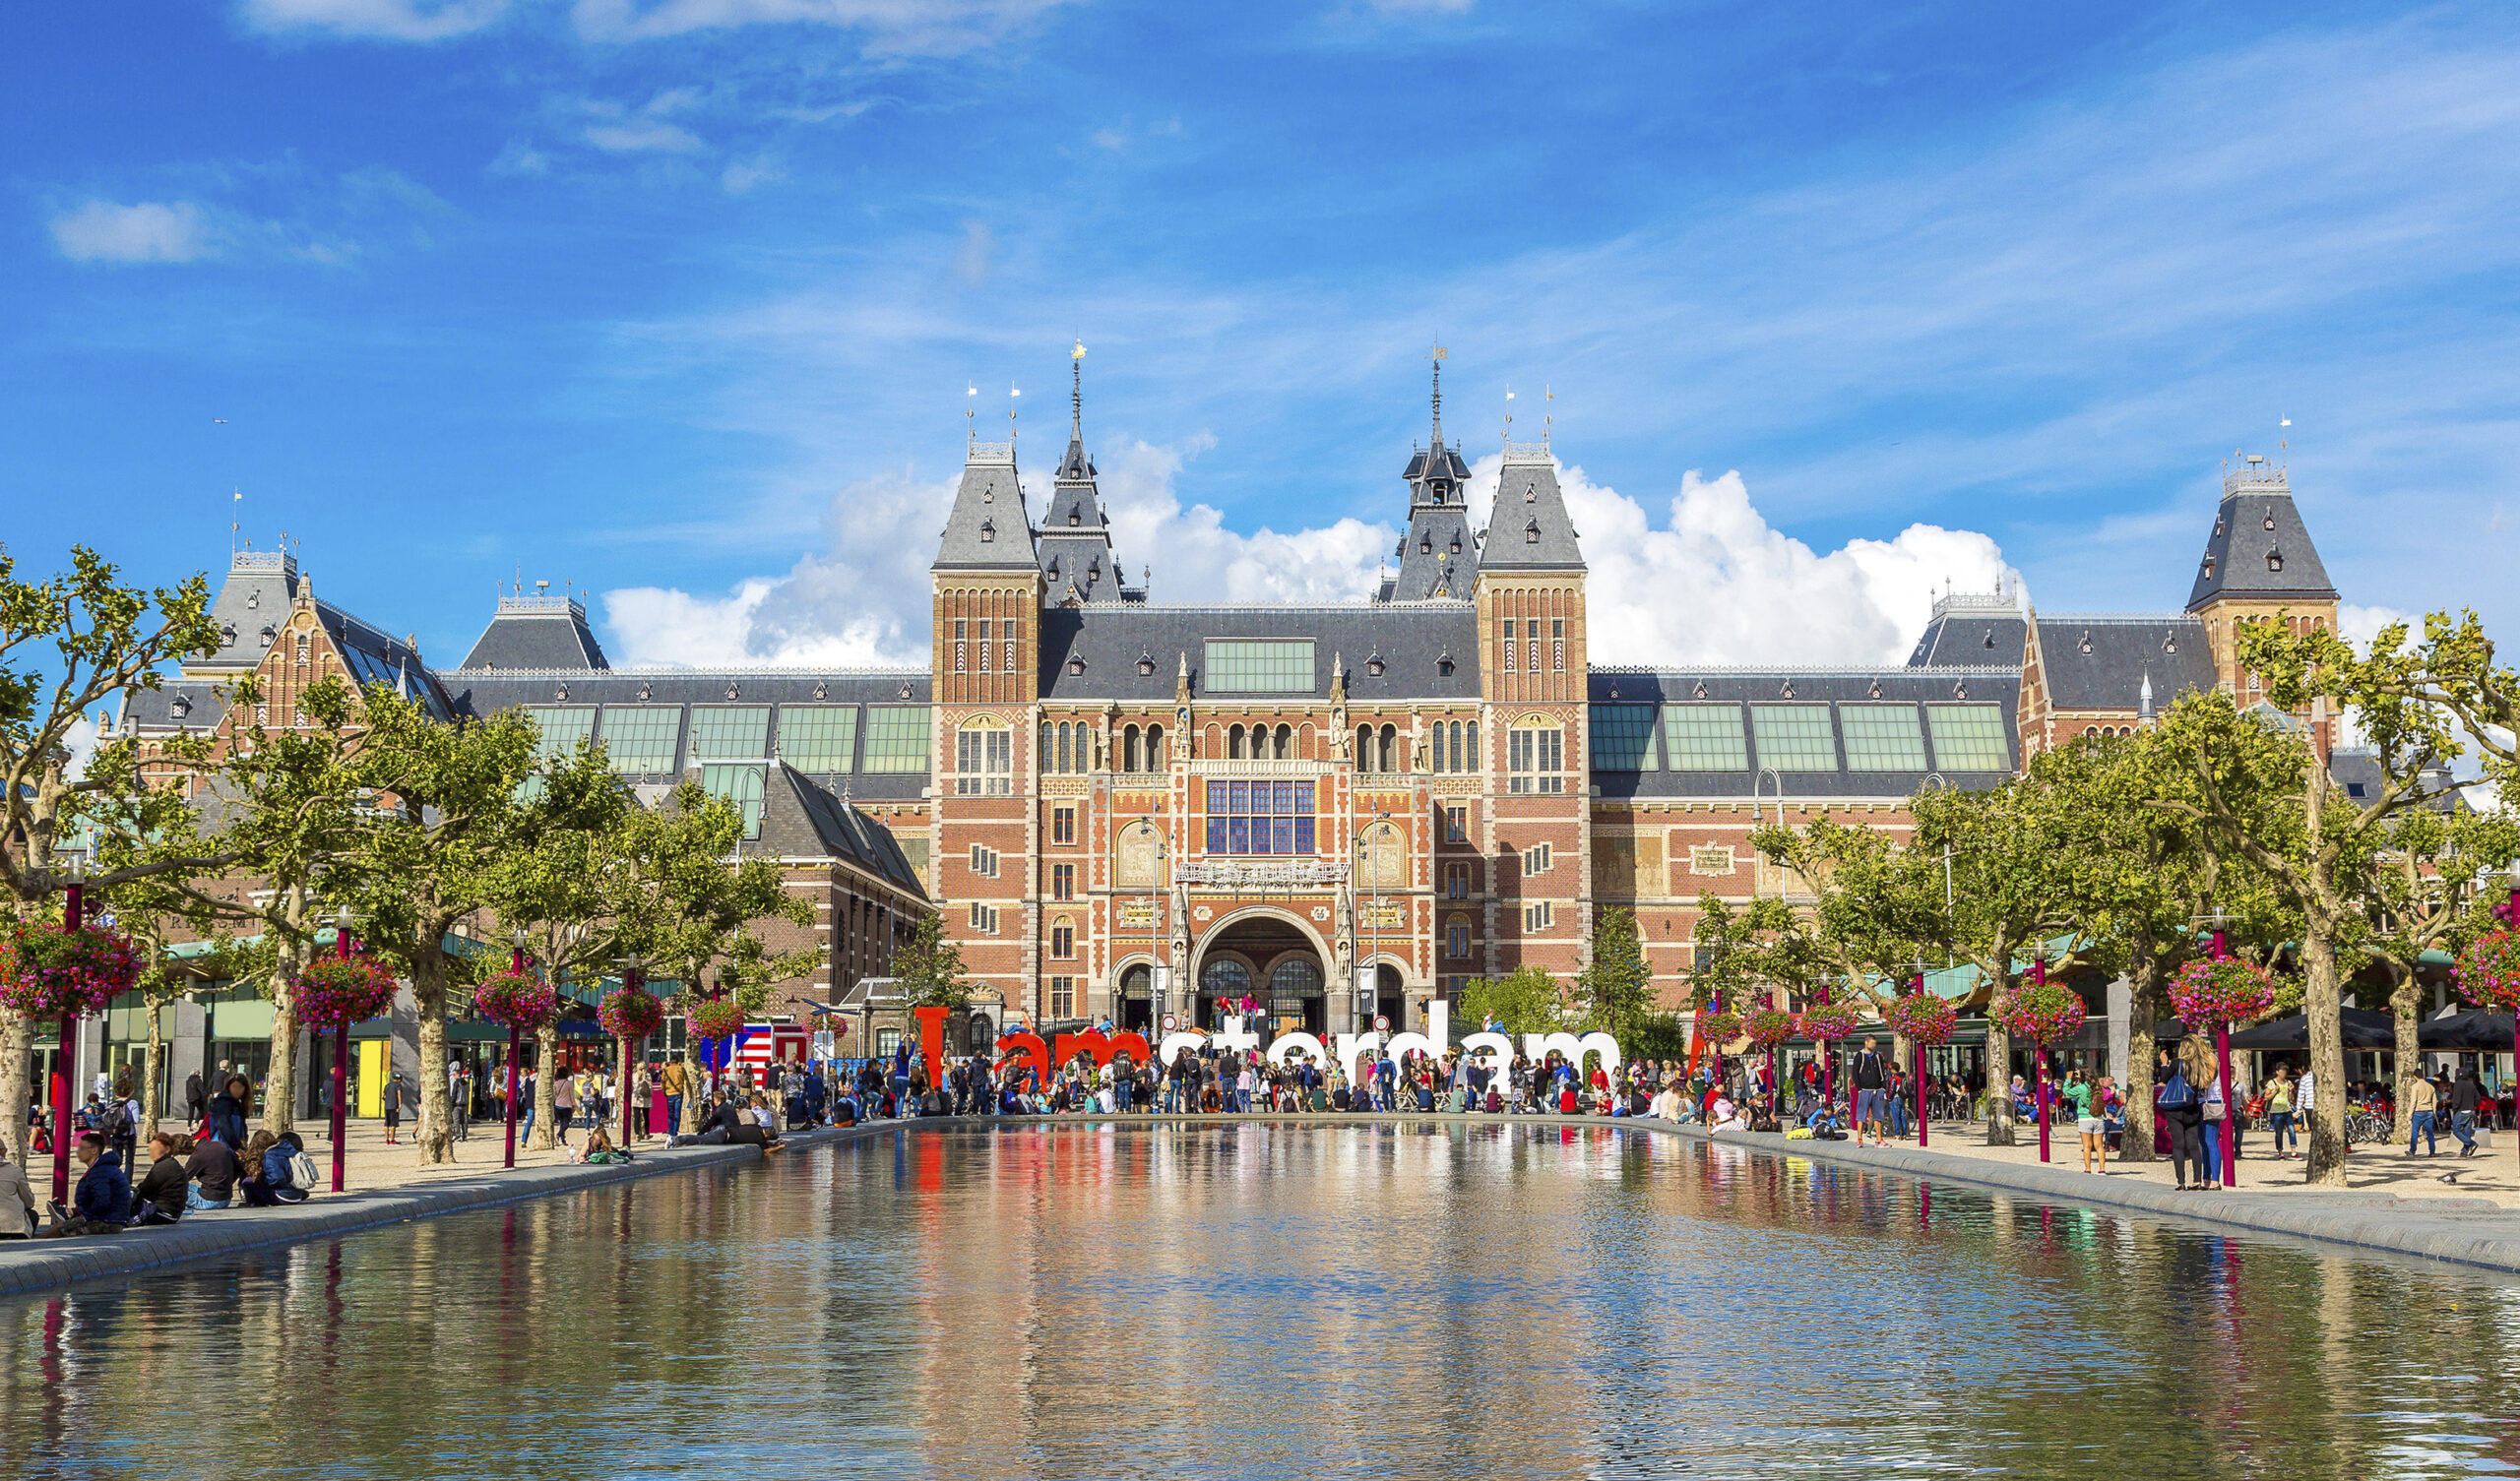 Three museums you must visit while in Amsterdam